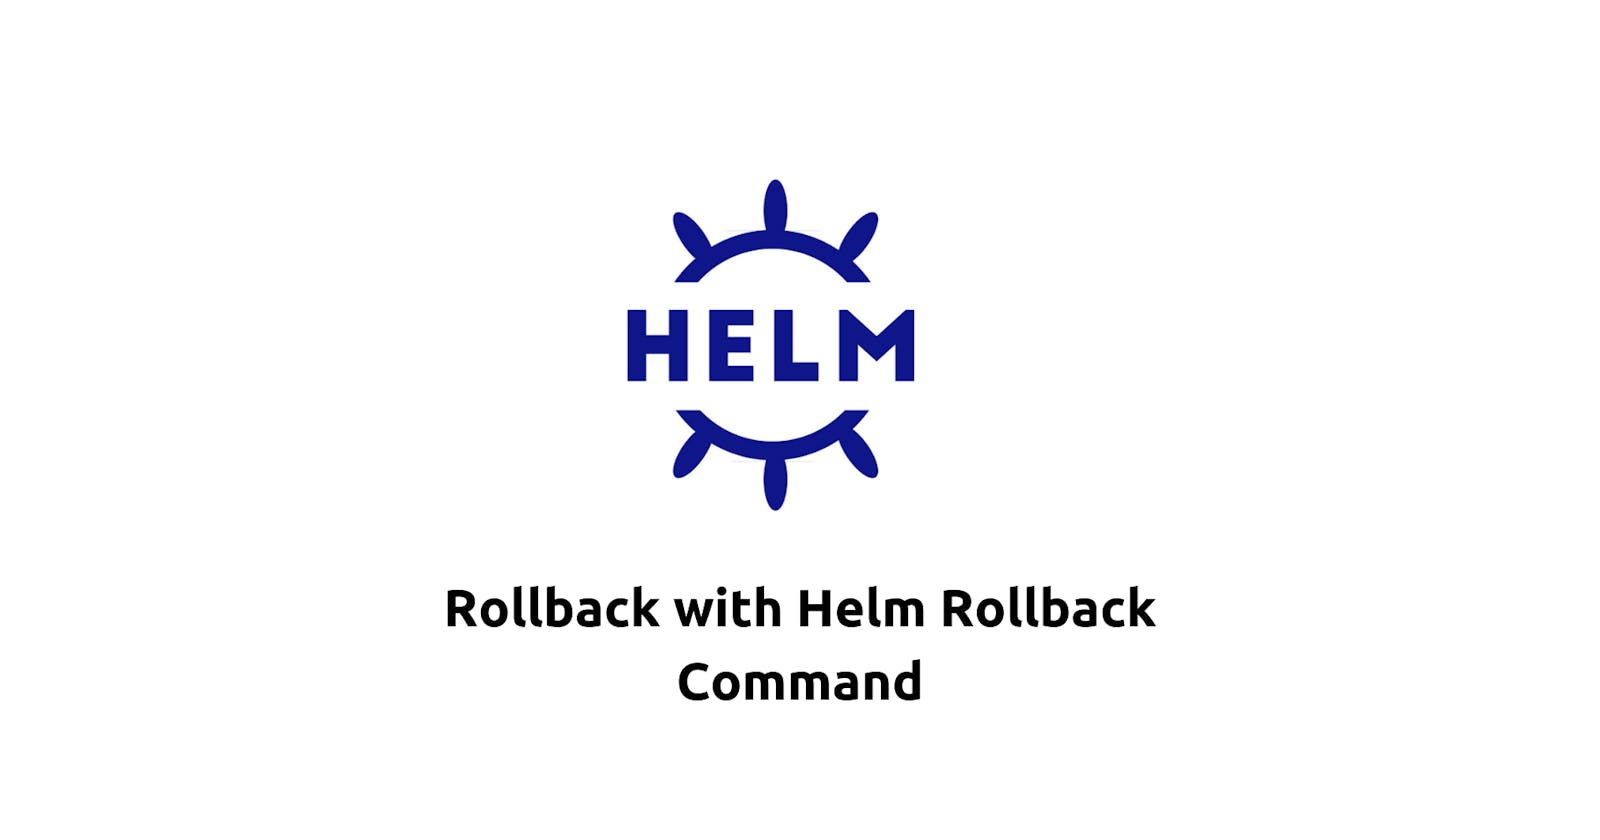 Rollback with Helm Rollback Command